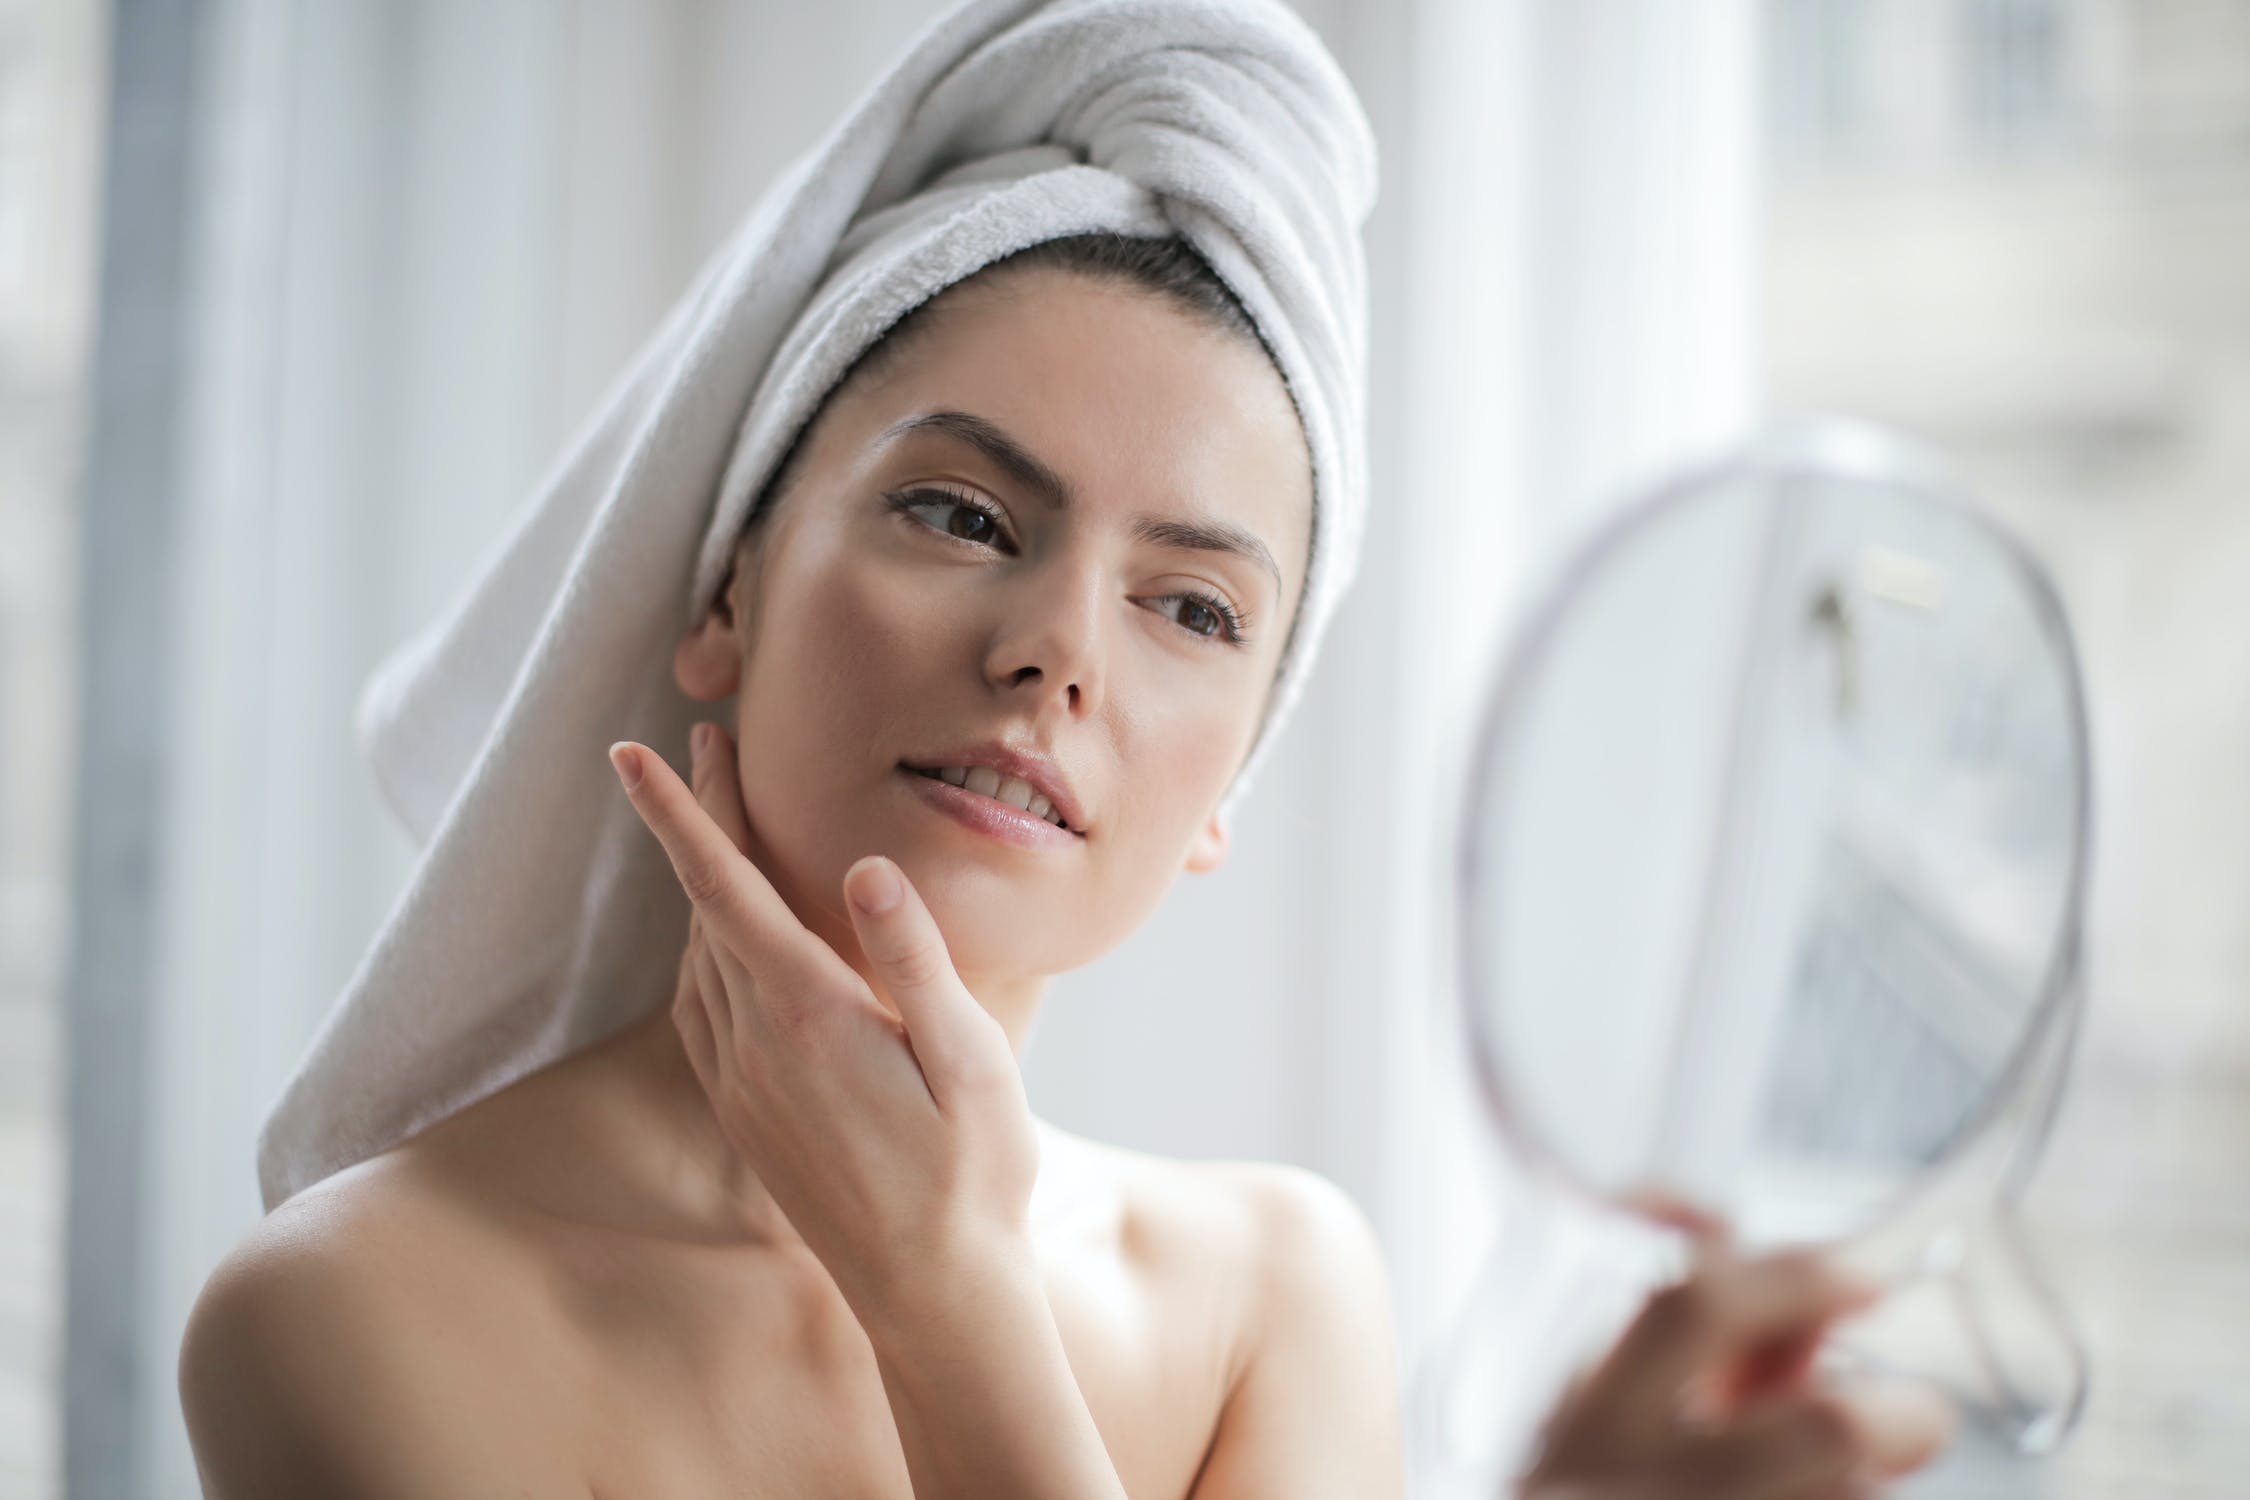 4 Skincare Tips For Those In a Hurry